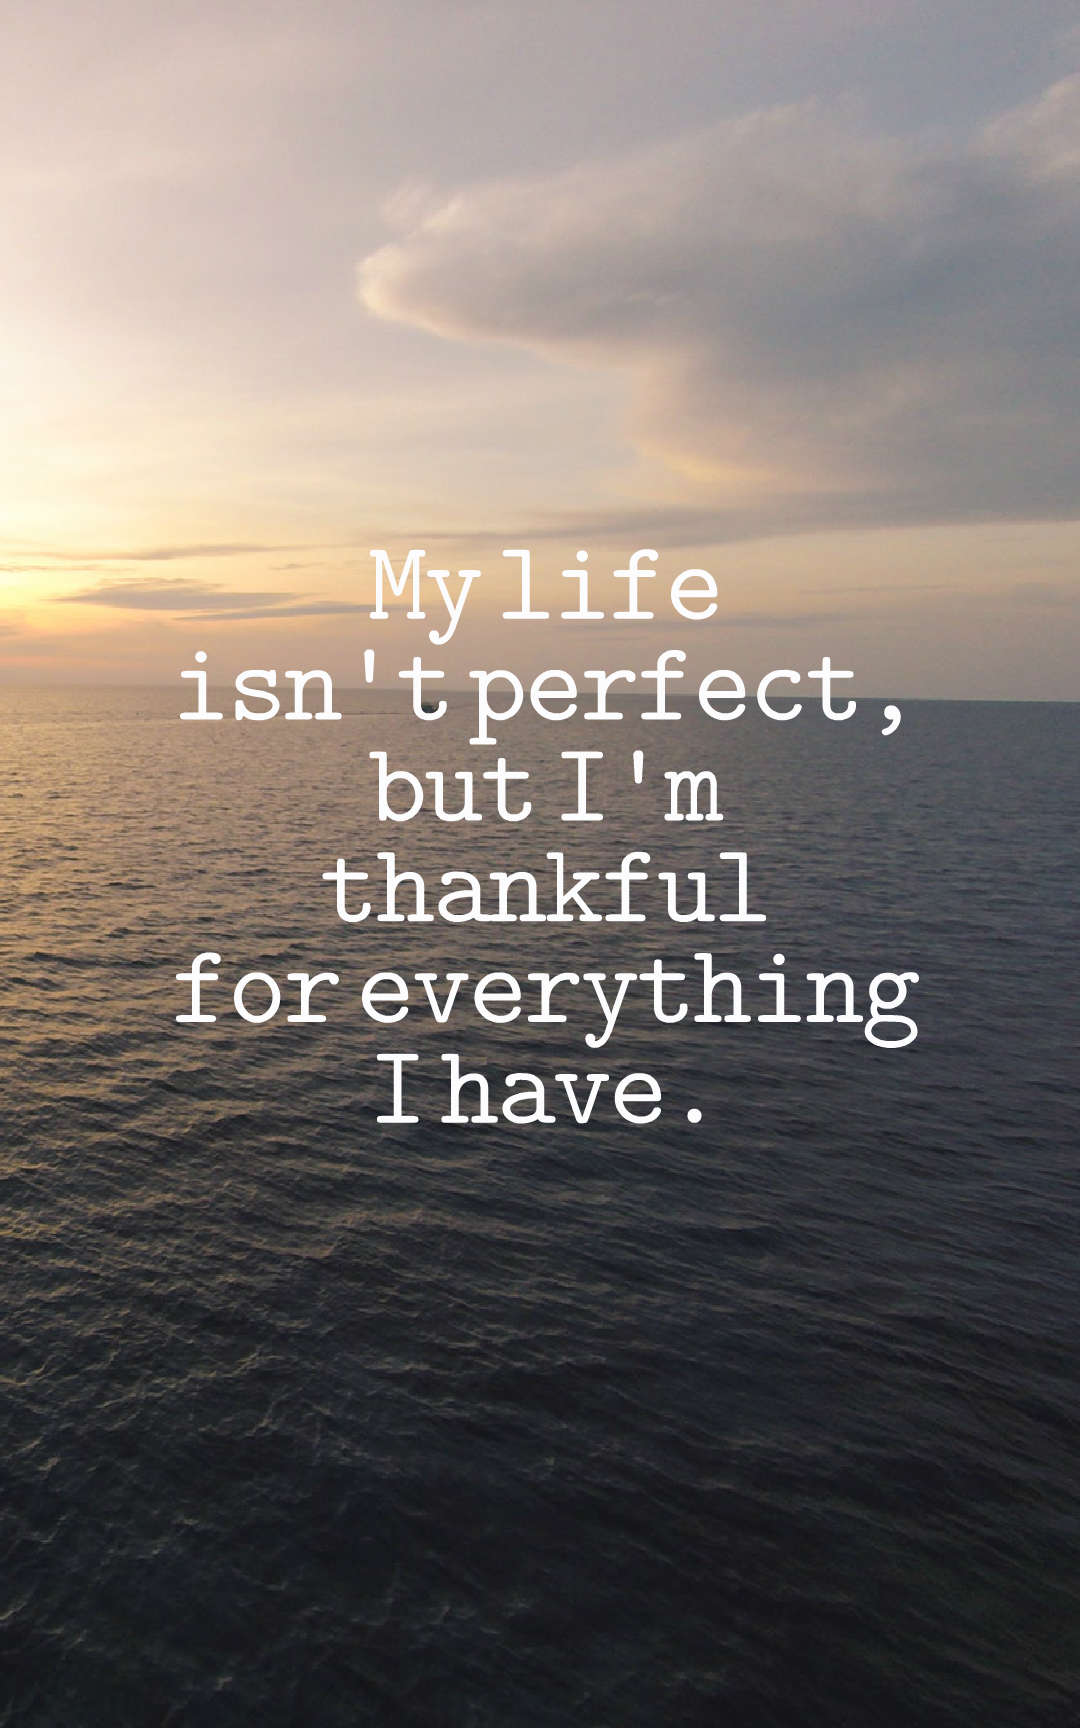 My life isnt perfect but Im thankful for everything I have.